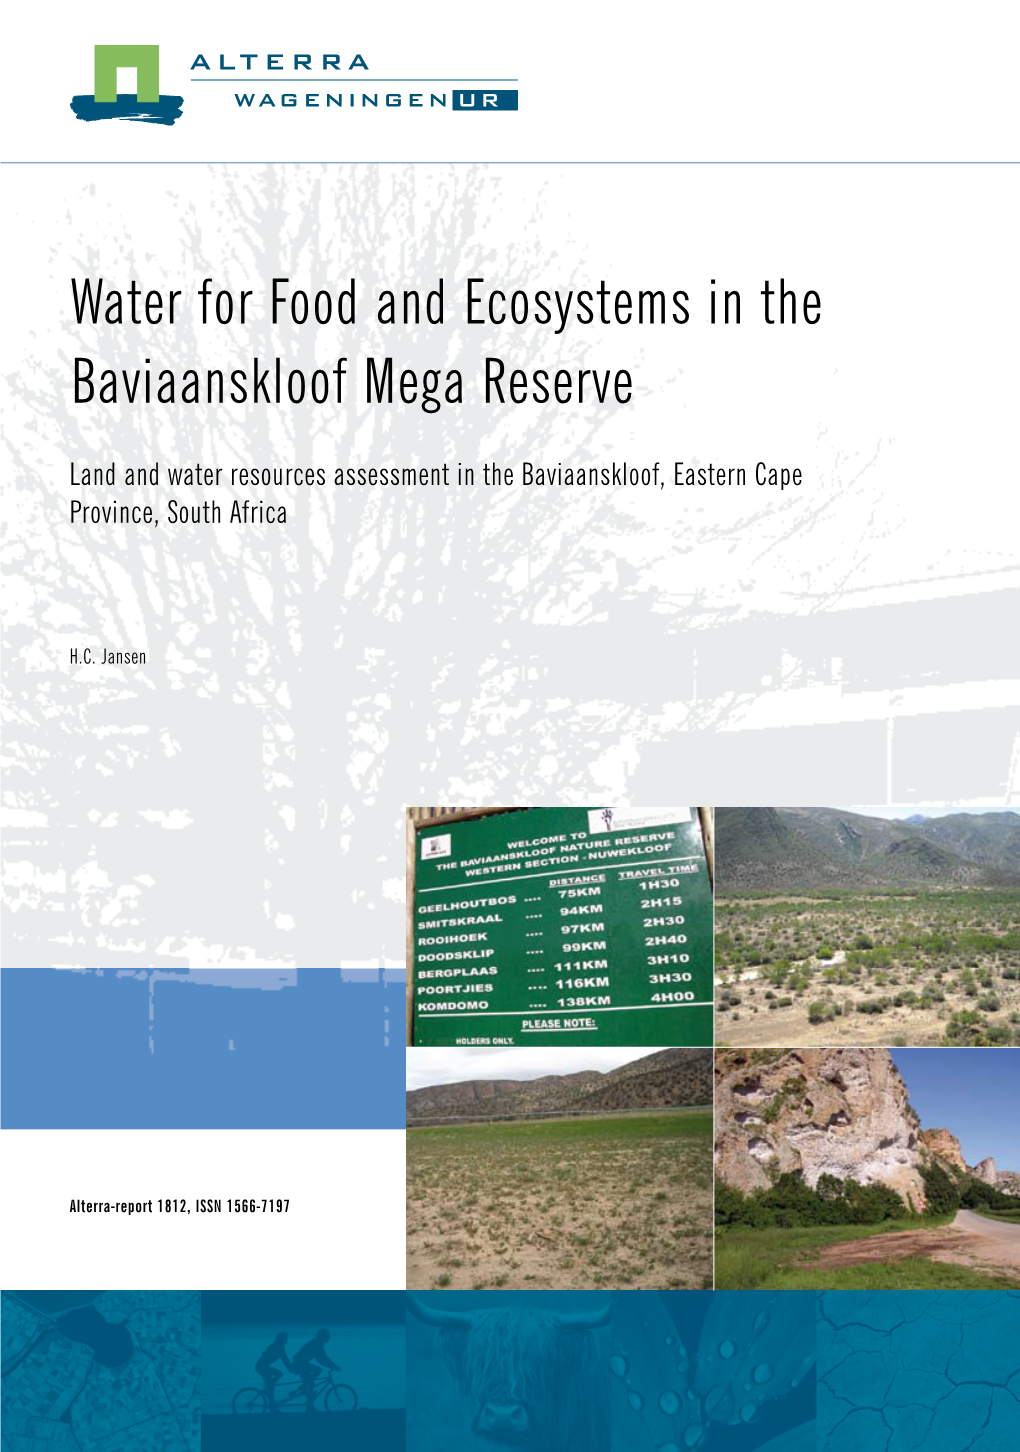 Water for Food and Ecosystems in the Baviaanskloof Mega Reserve